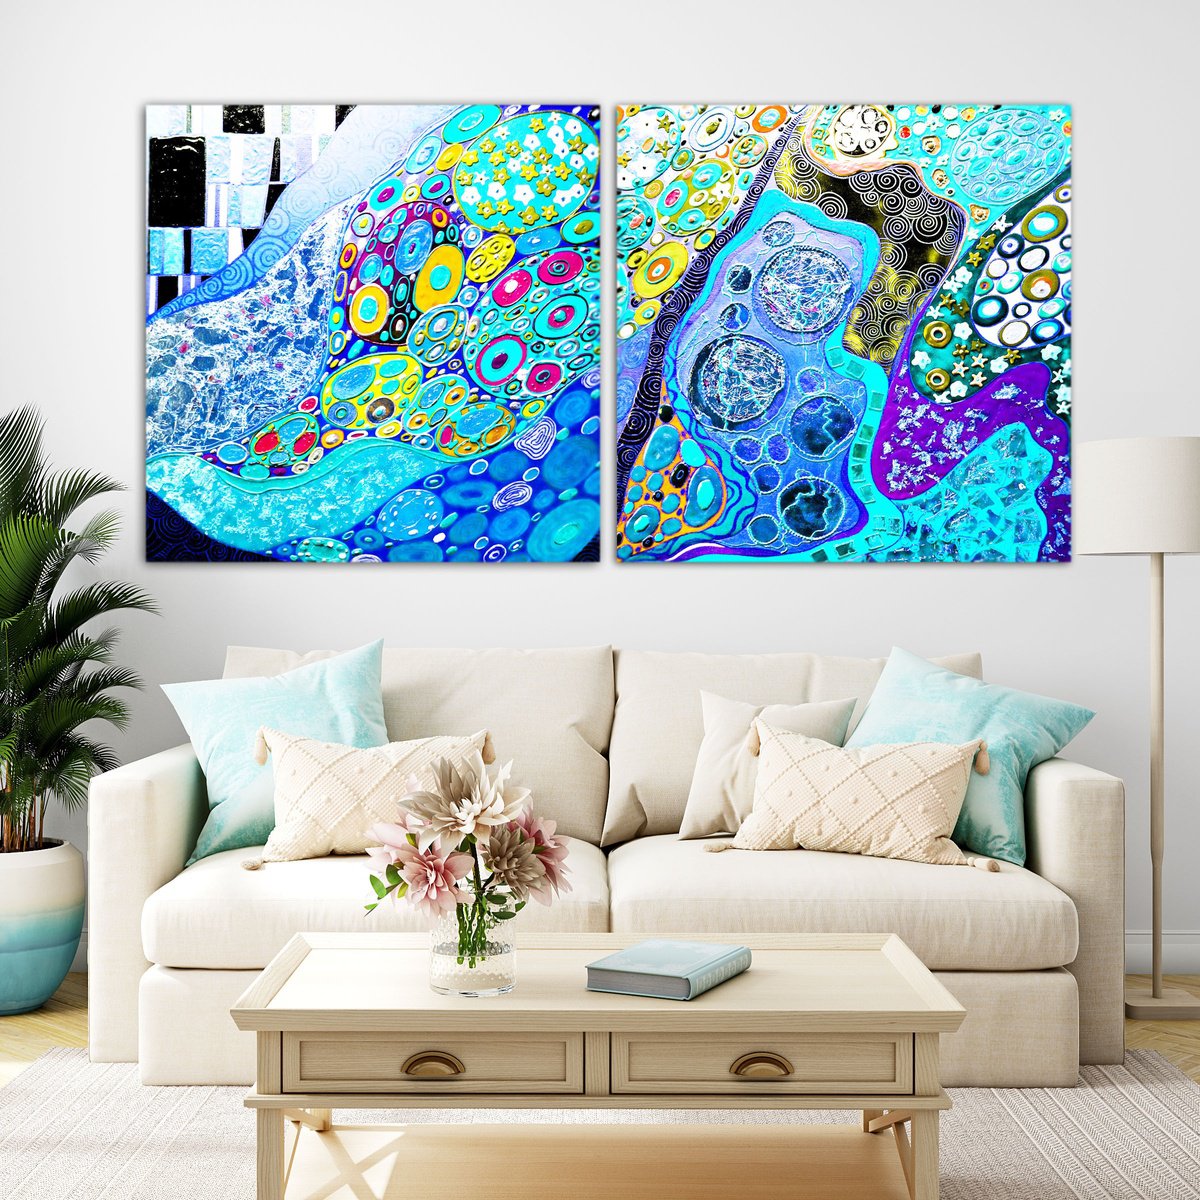 2 pieces 200?100 cm Abstract painting. Turquoise blue Large wall art relief Klimt inspired... by BAST